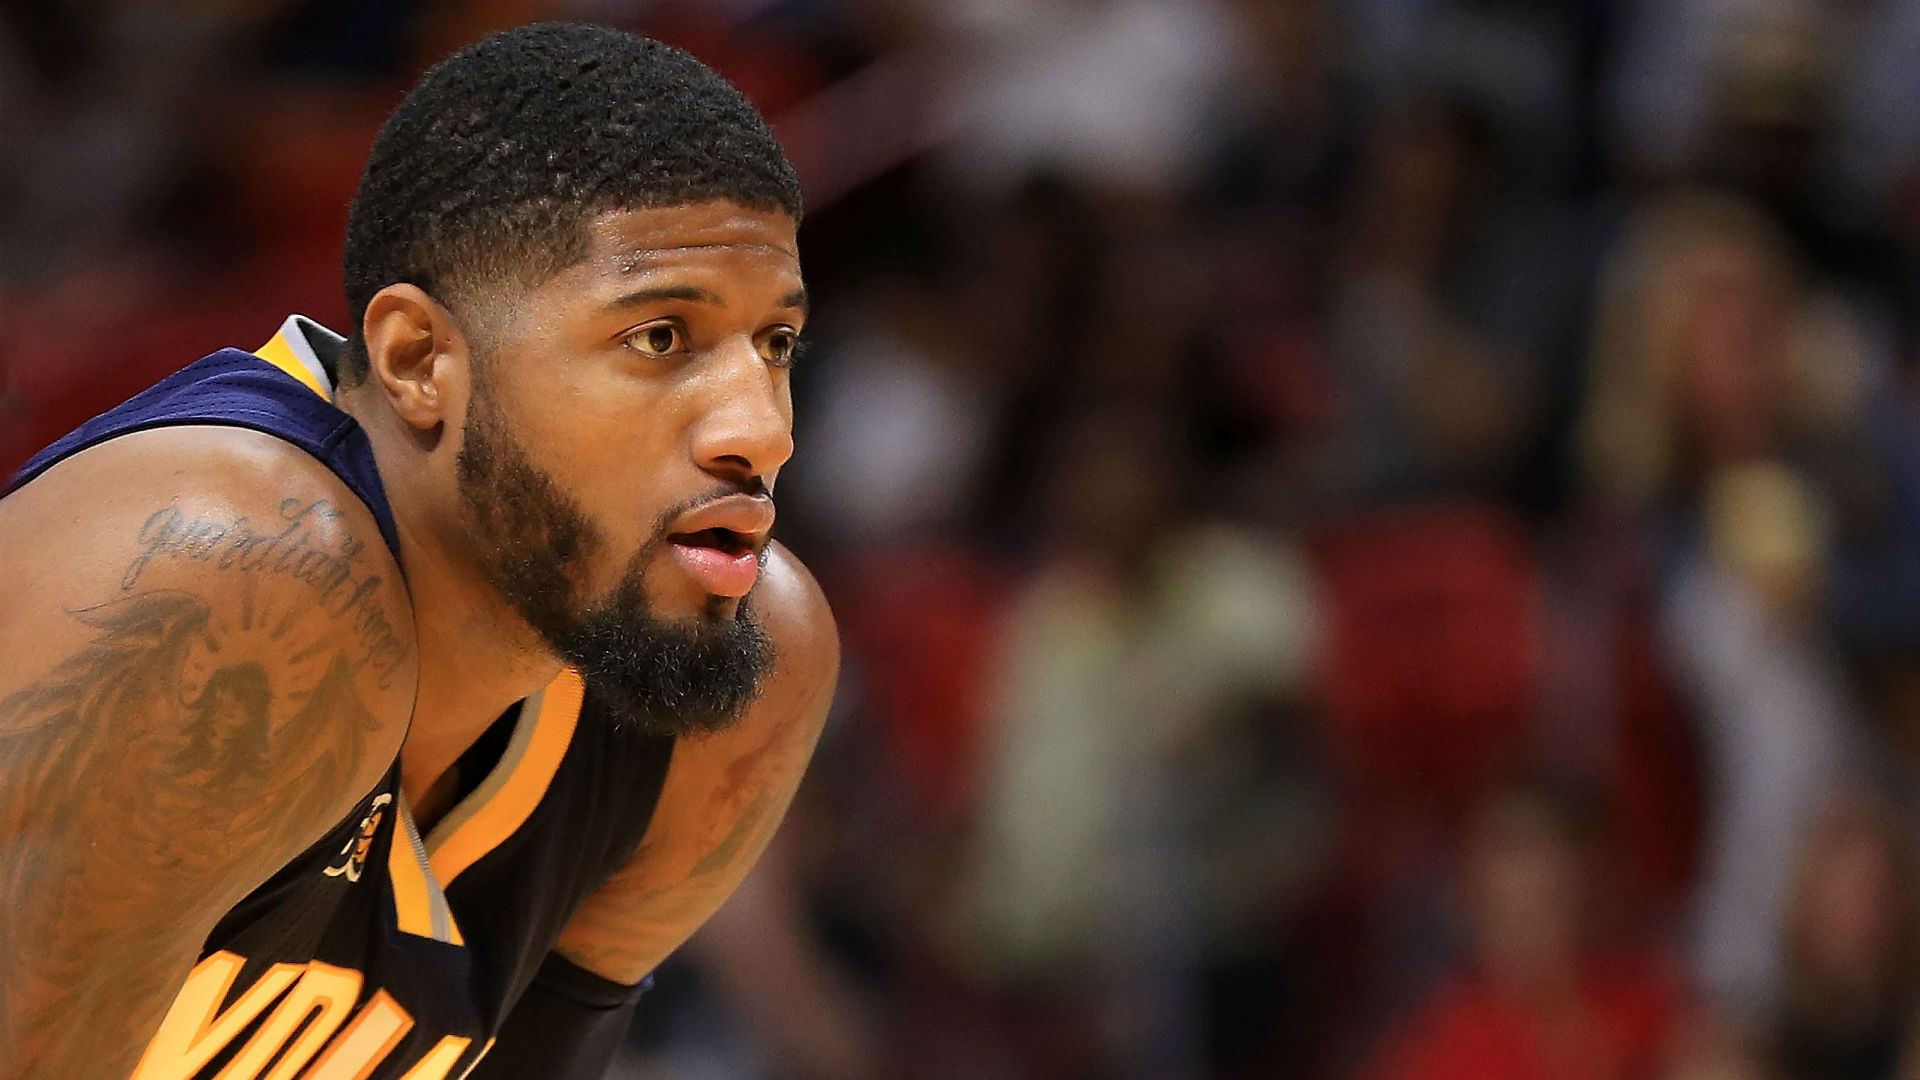 For Paul George and the Pacers, the future remains murky | NBA